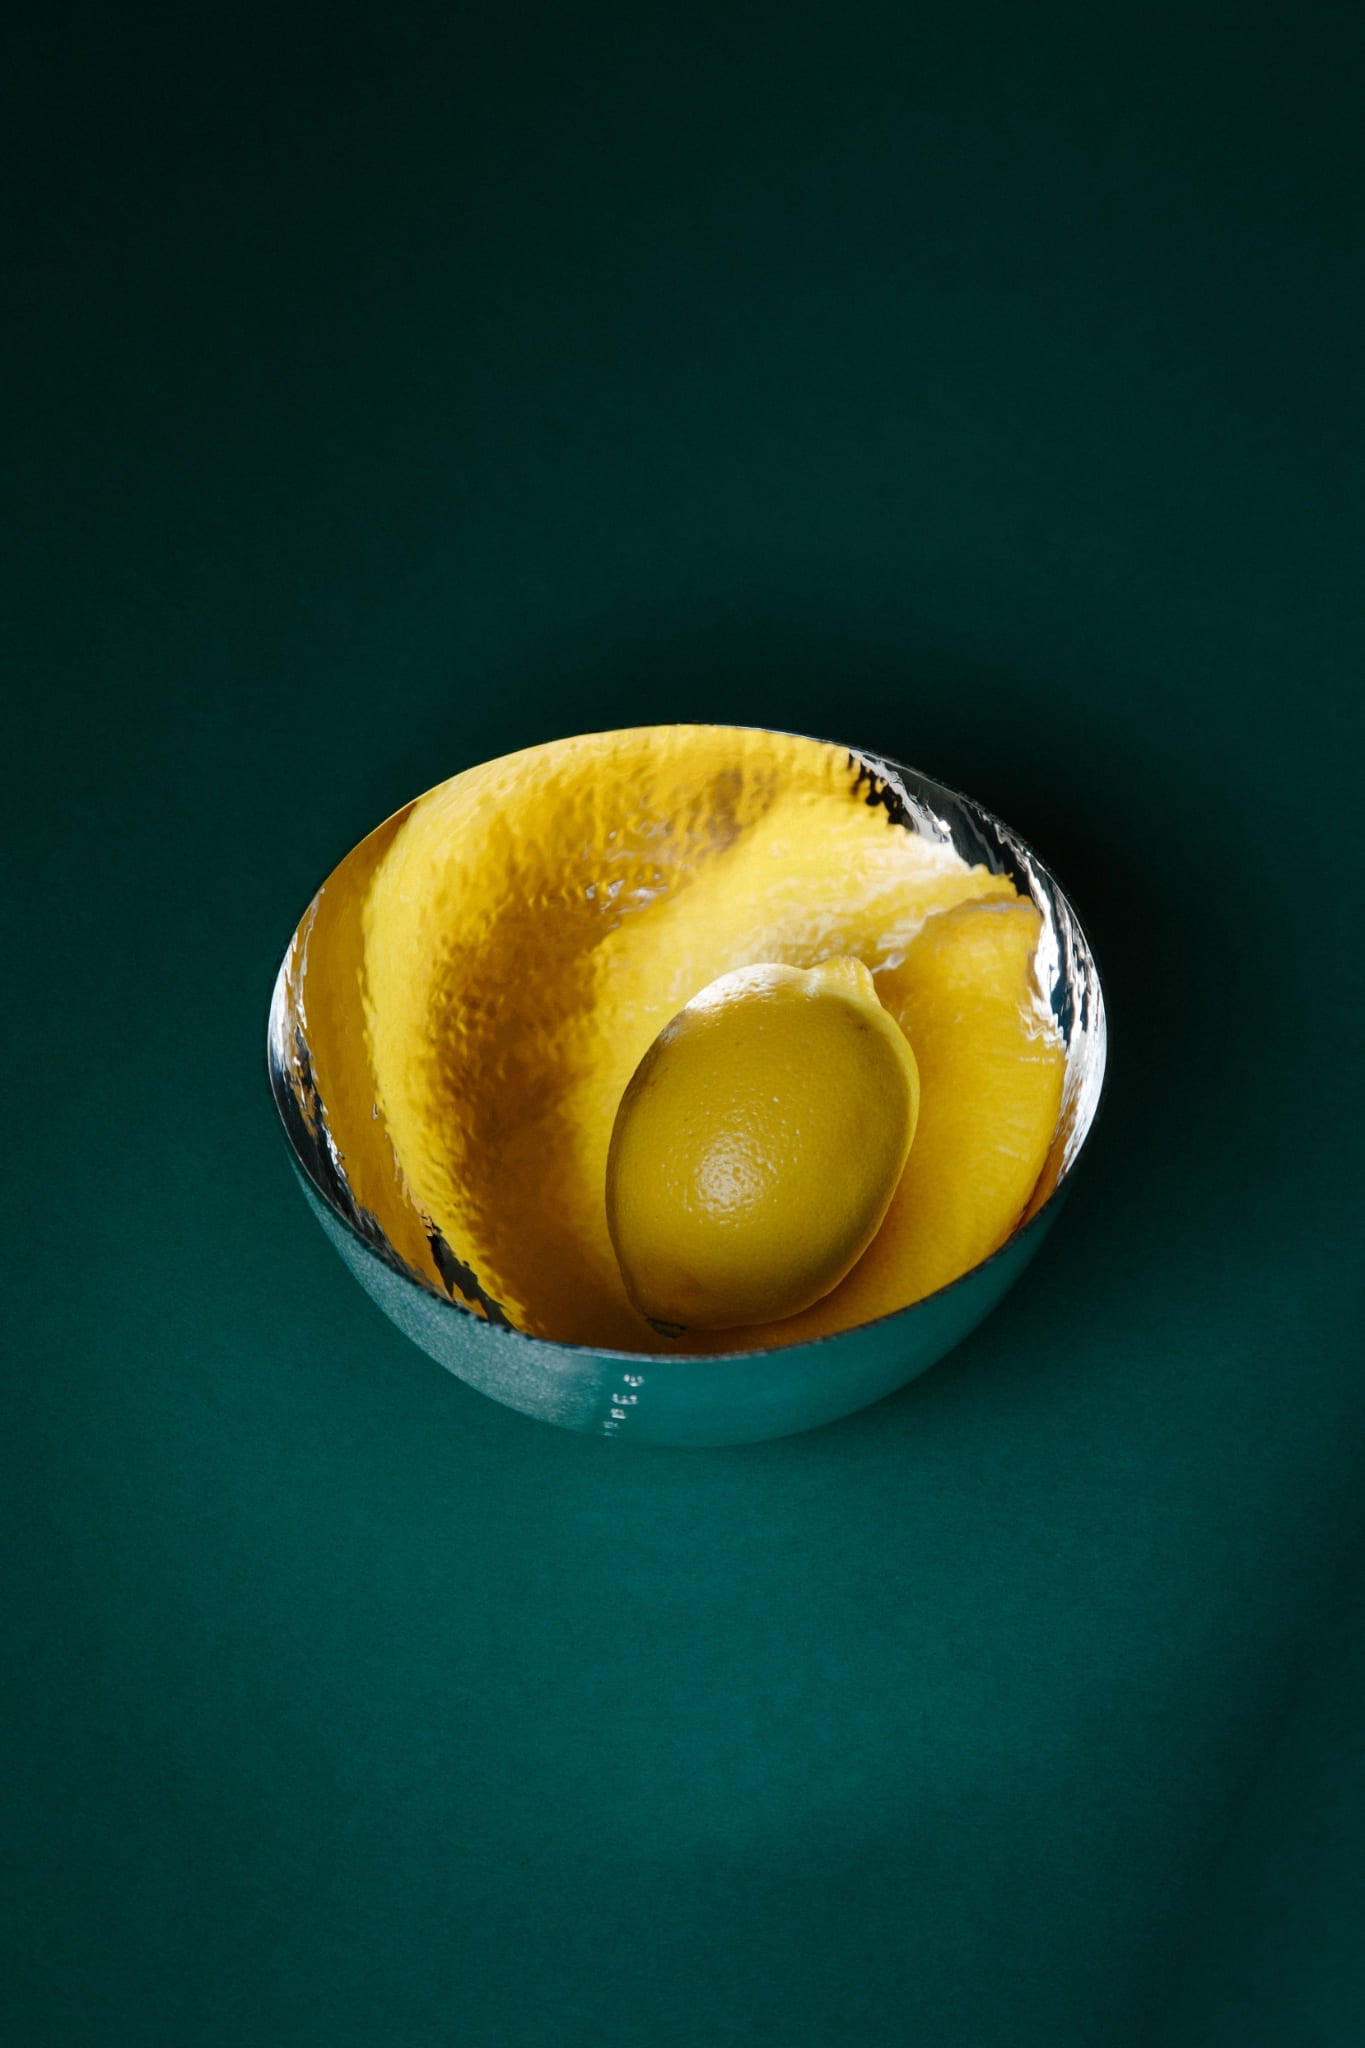 A bright dimpled lemon demonstrates the reflective inner surface of a sterling silver bowl.